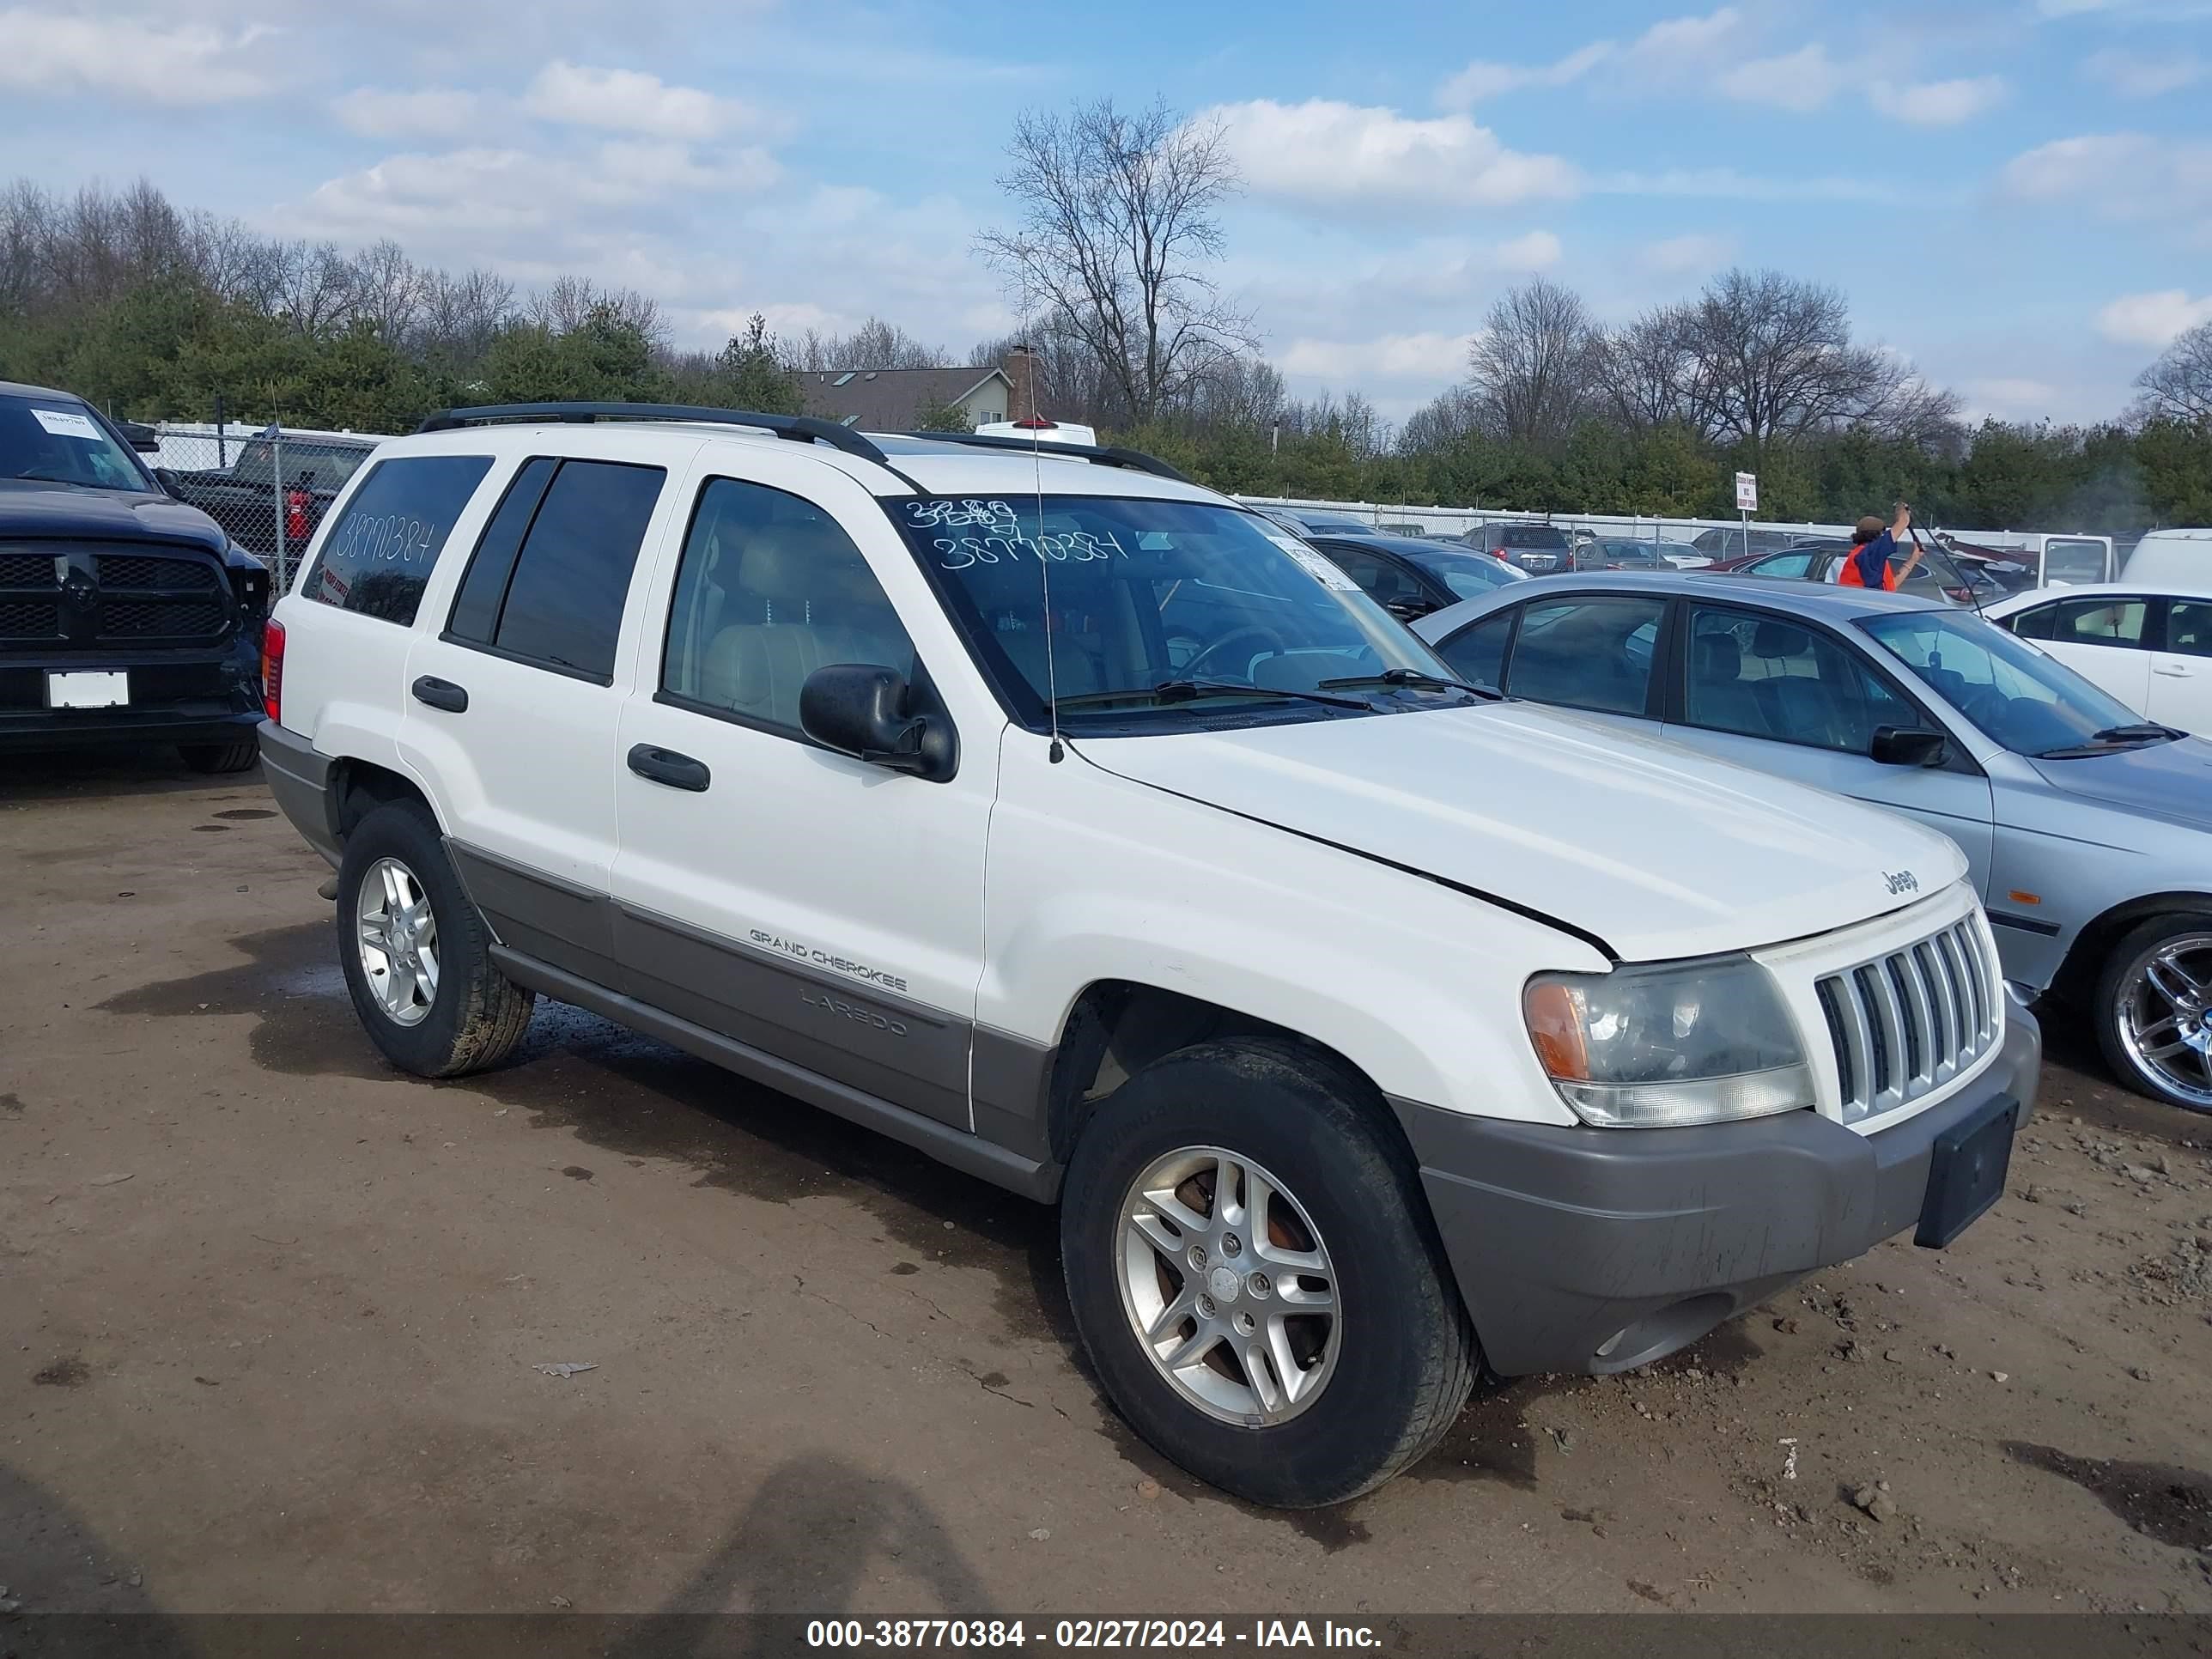 vin: 1J8GW48S24C379414 1J8GW48S24C379414 2004 jeep grand cherokee 4000 for Sale in 46619, 25631 State Road 2, South Bend, Indiana, USA